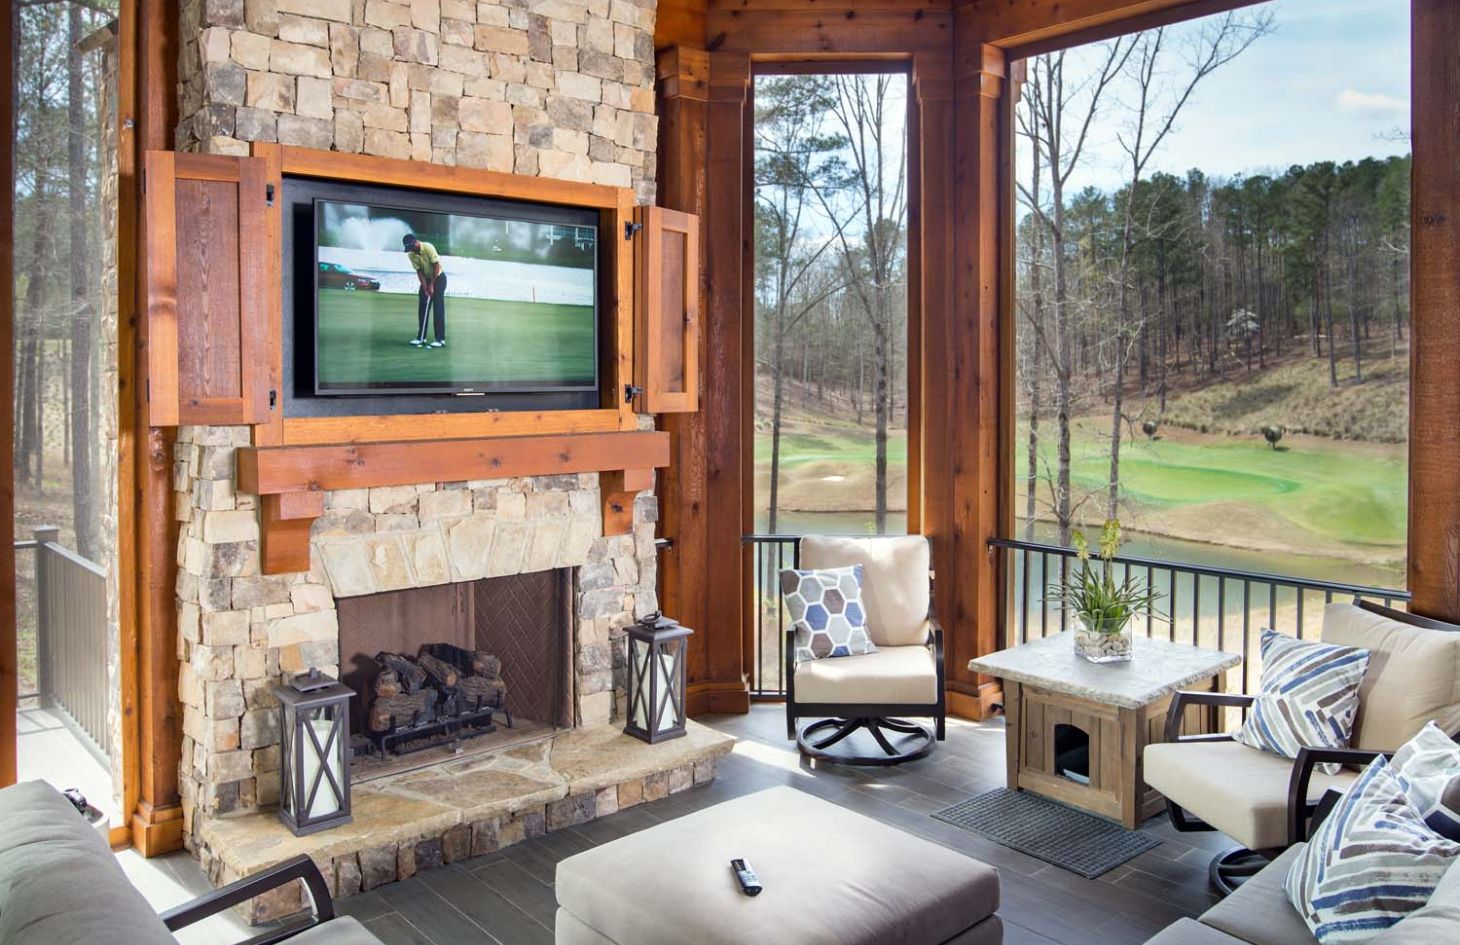 shot of patio outdoor with wooden accents and tv on wall